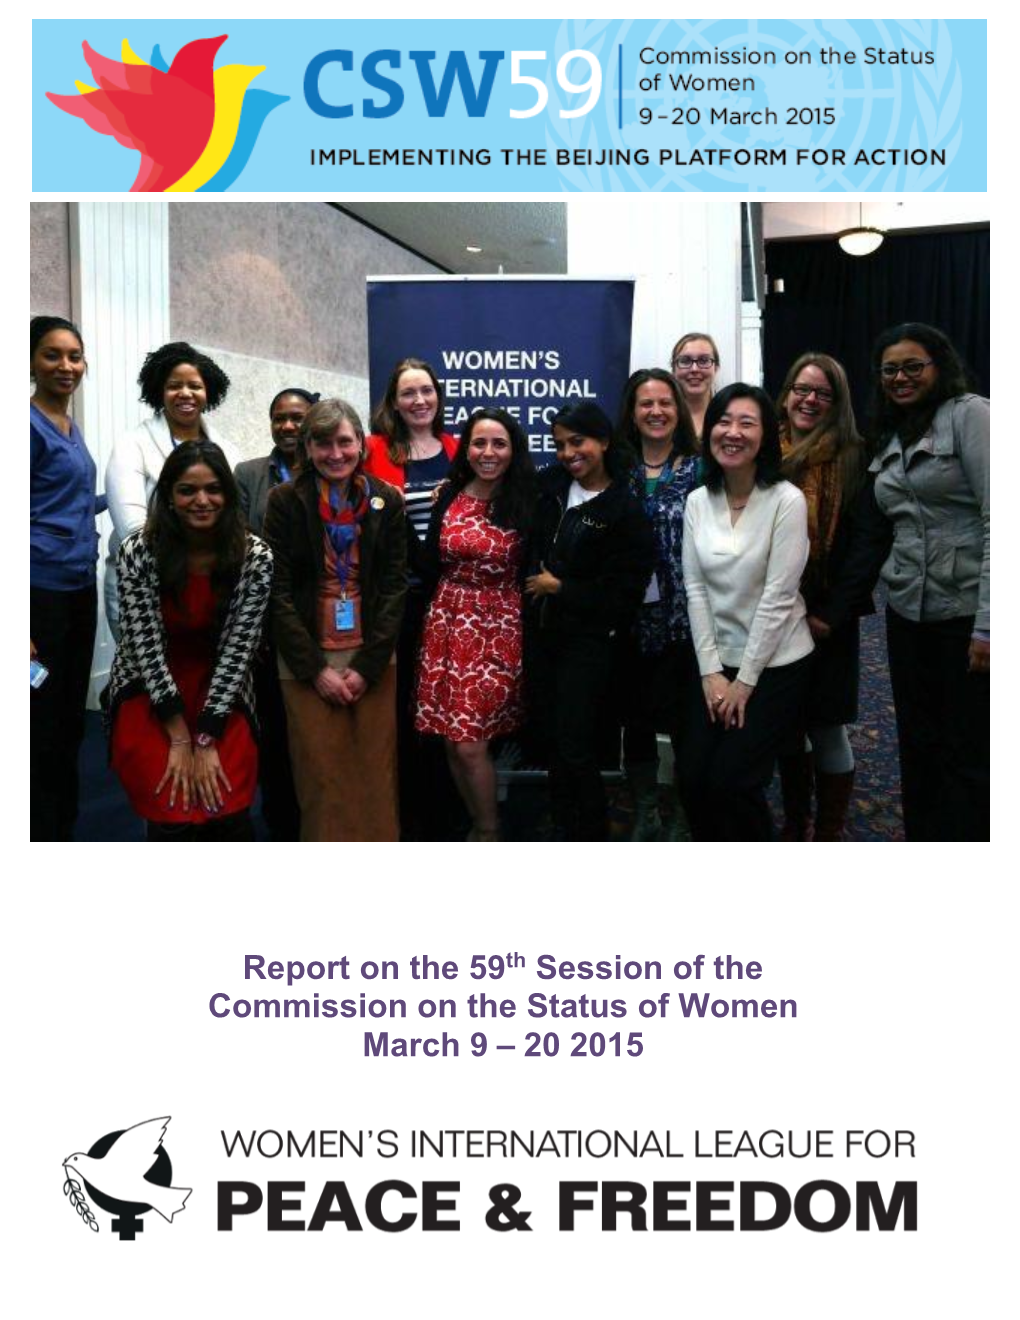 Report on the 59Th Session of the Commission on the Status of Women March 9 – 20 2015